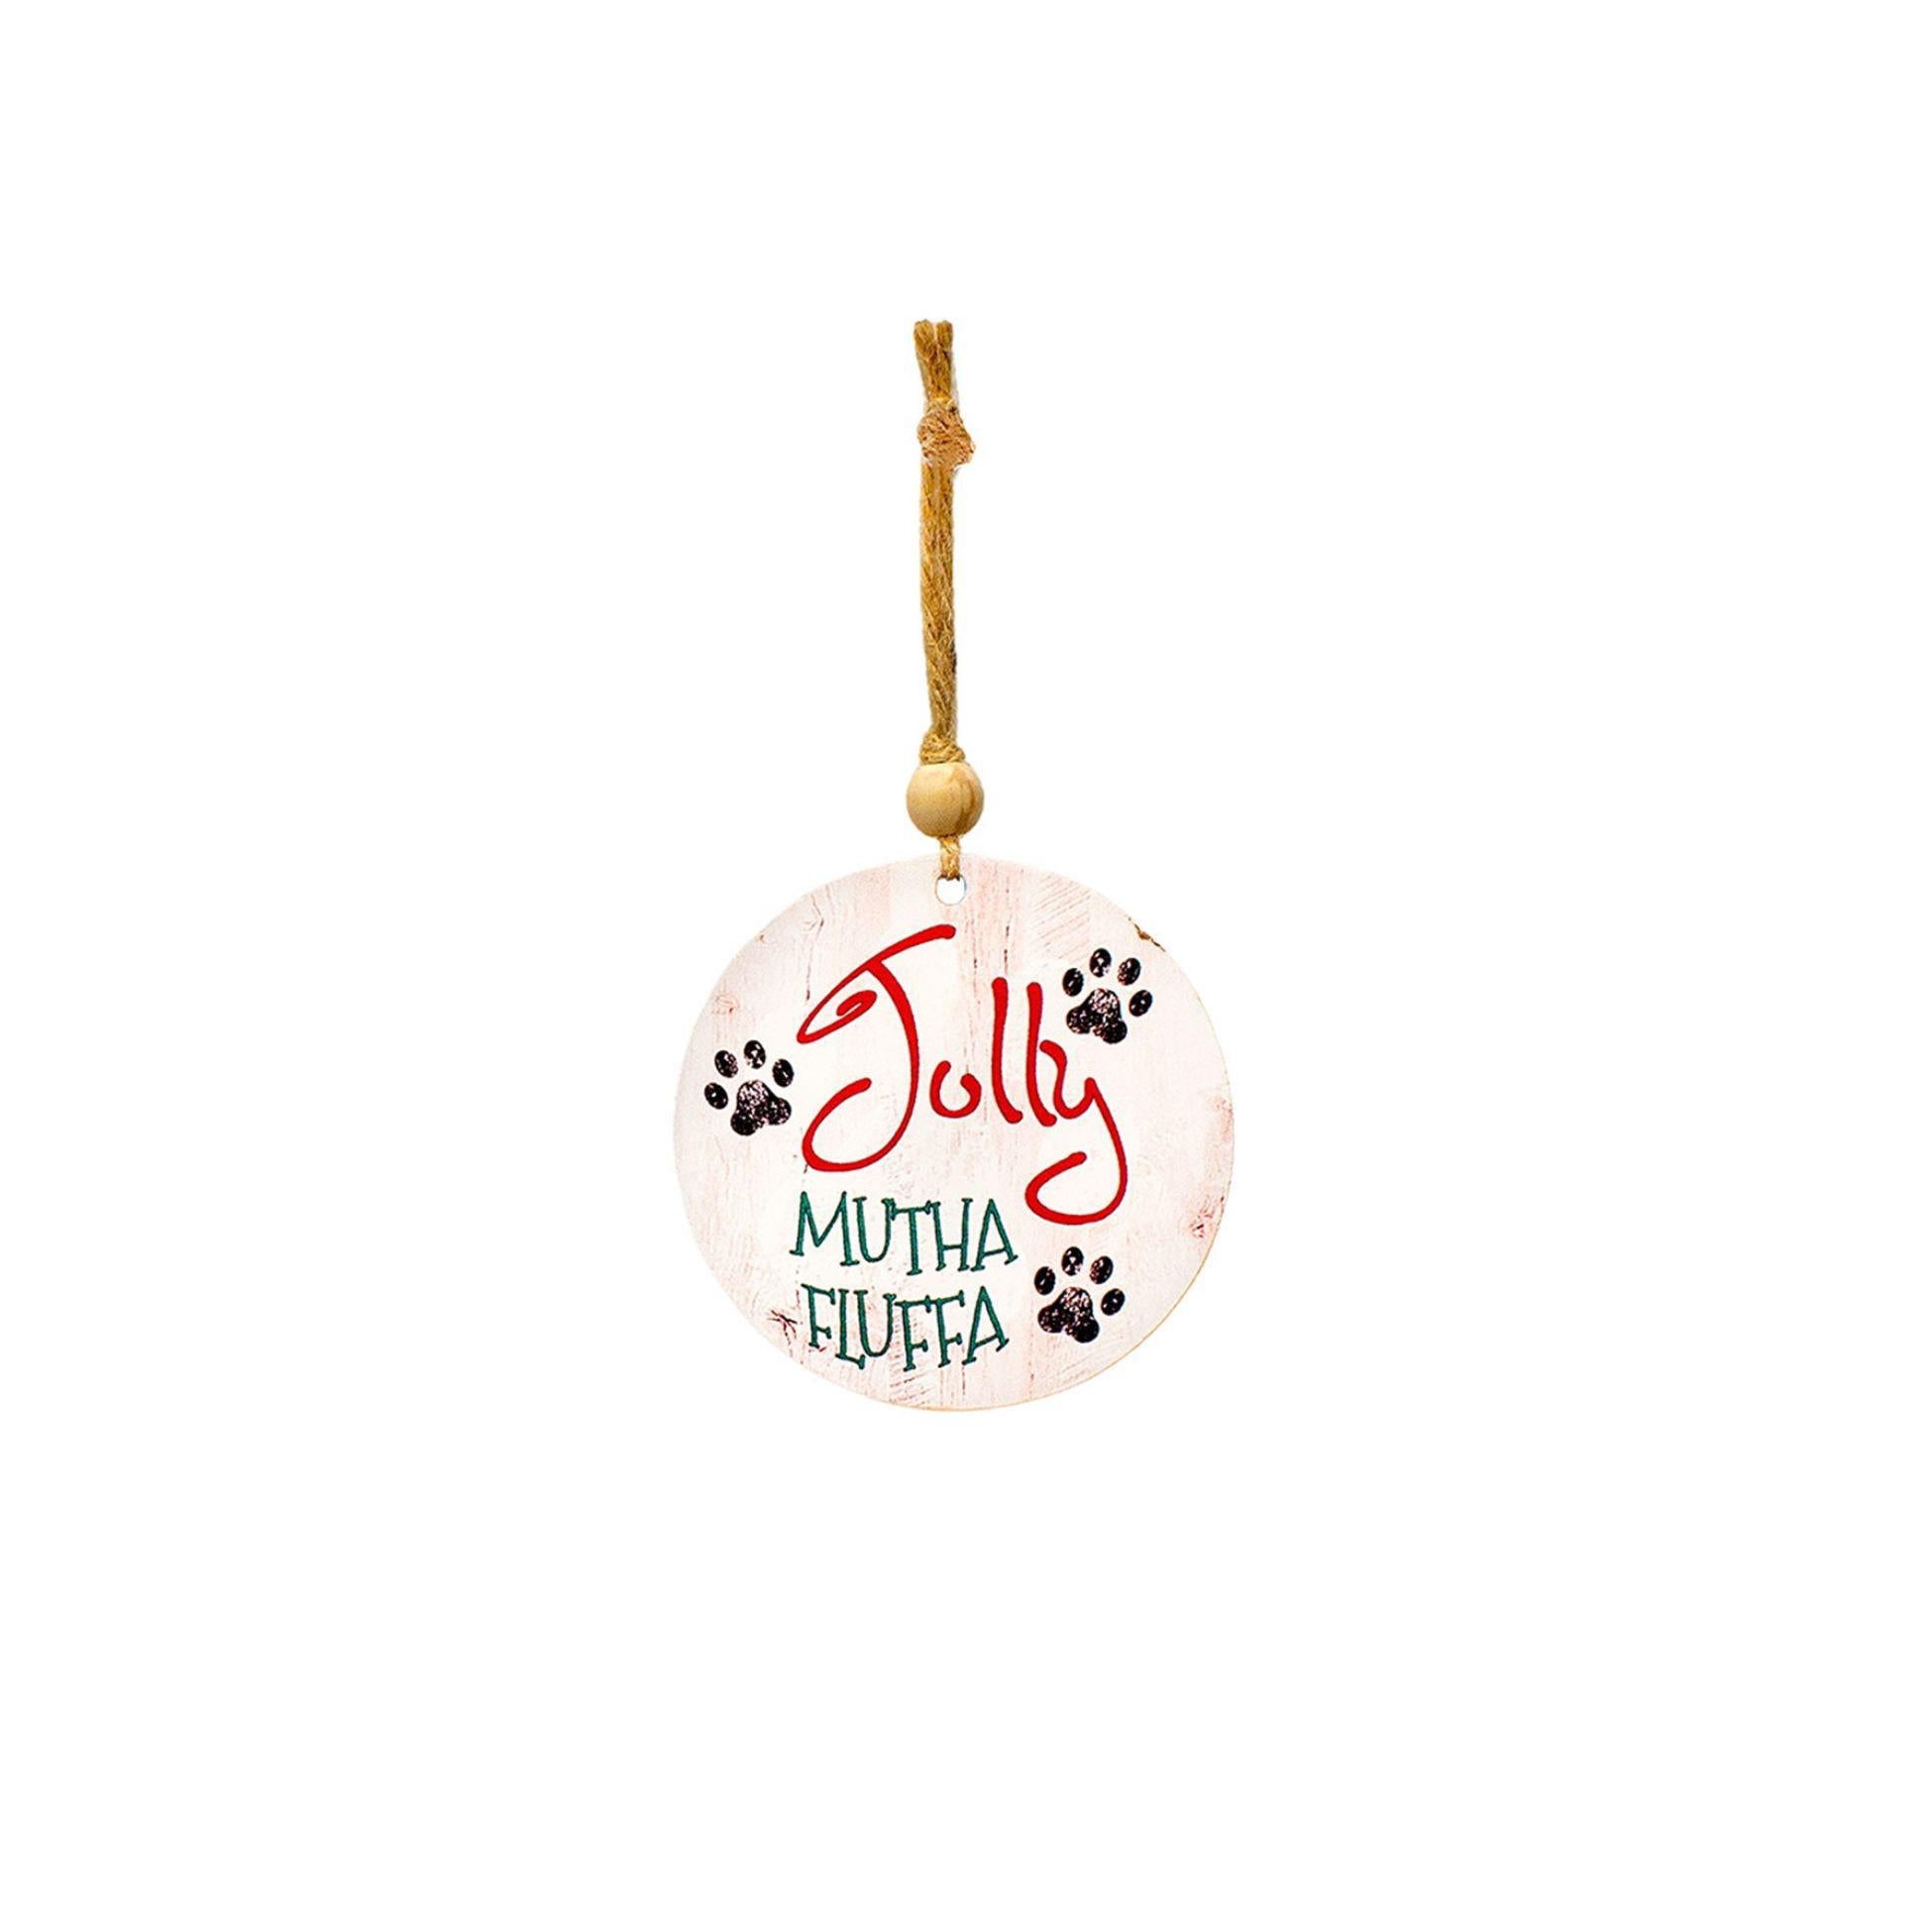 Wood Silly Pet Ornament - 3.75"Di